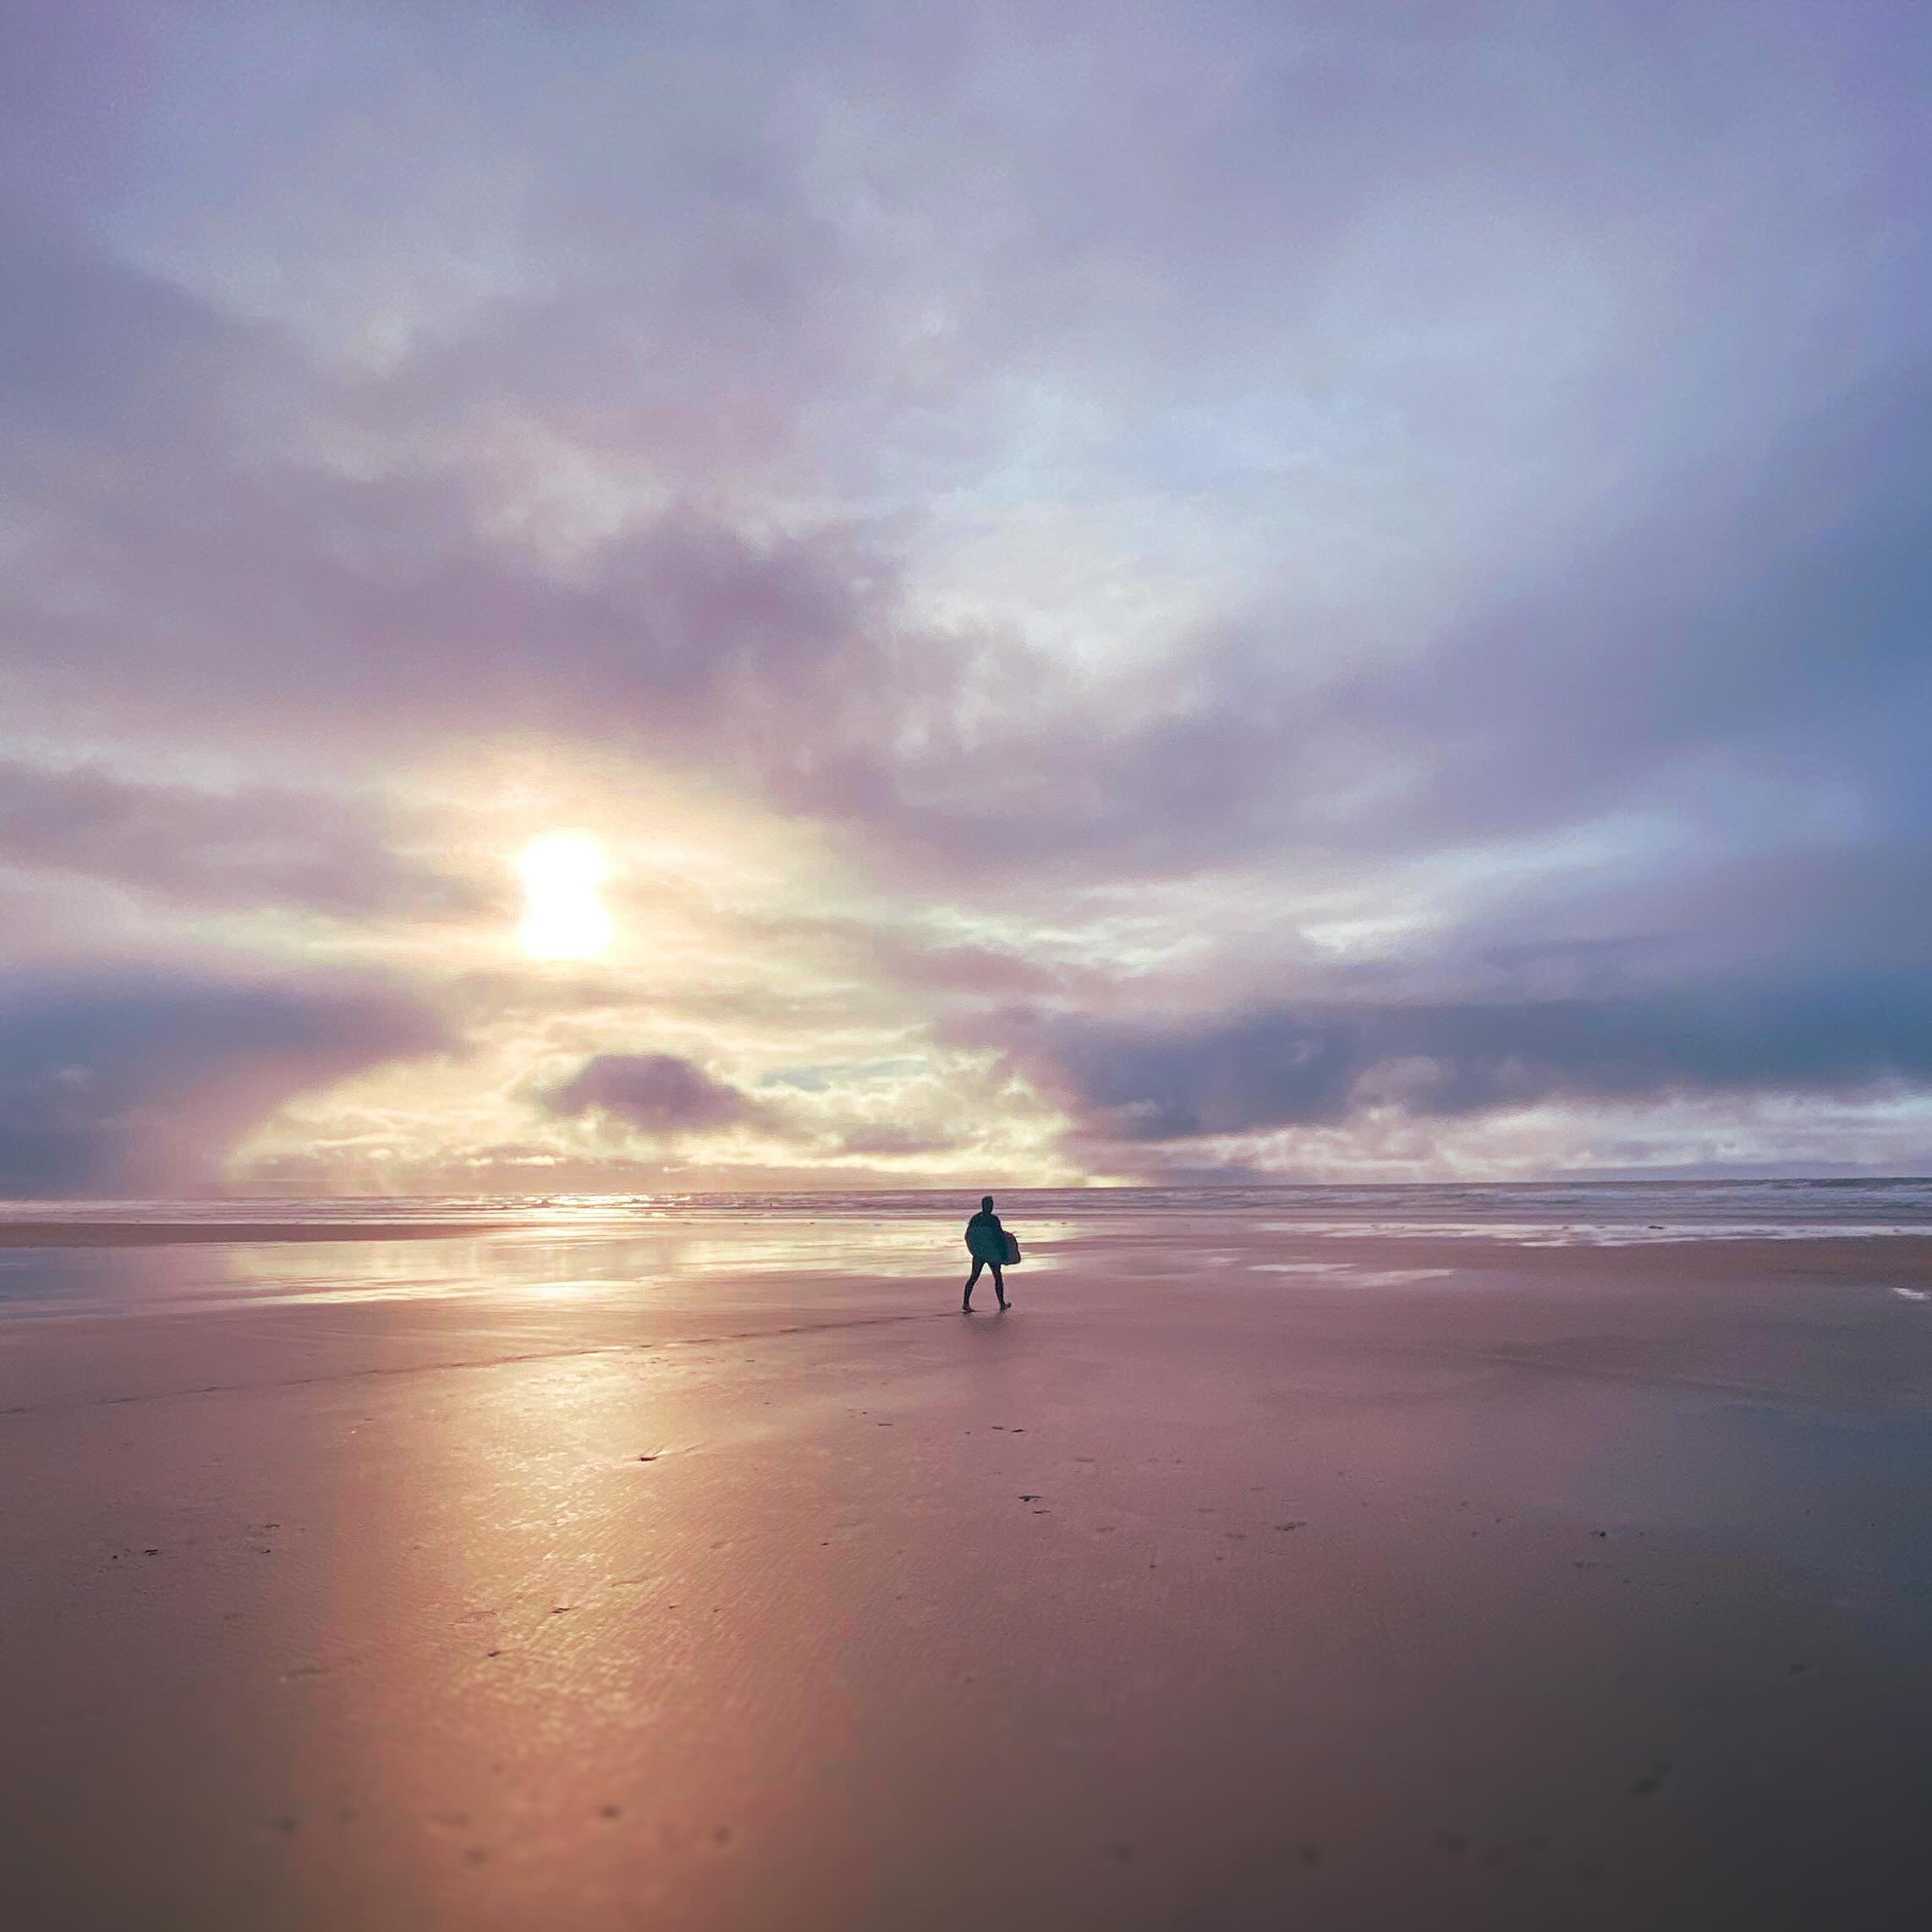 Early morning surfer at Saunton Beach in North Devon that I captured on my old iPhone 11 Pro Max. Finding all kinds of images I never knew / remembered taking as I&rsquo;m scouring folders looking for images to re-edit with my new workflow in Lightro